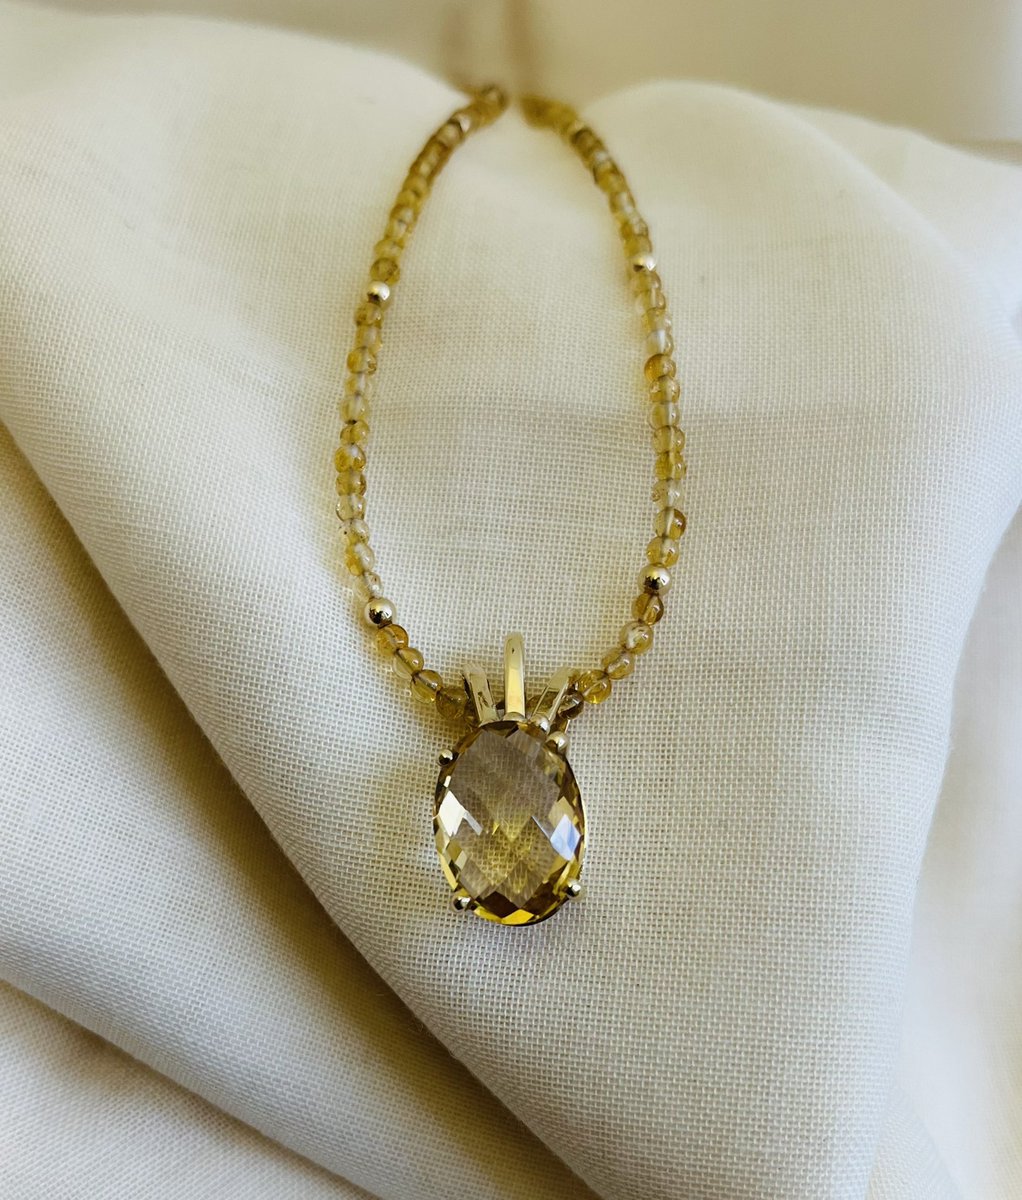 Now that a special anniversary has passed and the very happy lady is wearing her pineapple inspired necklace we can share this creation. #yellowgold #citrine #facetedcabochon #handmade #anniversary #gift